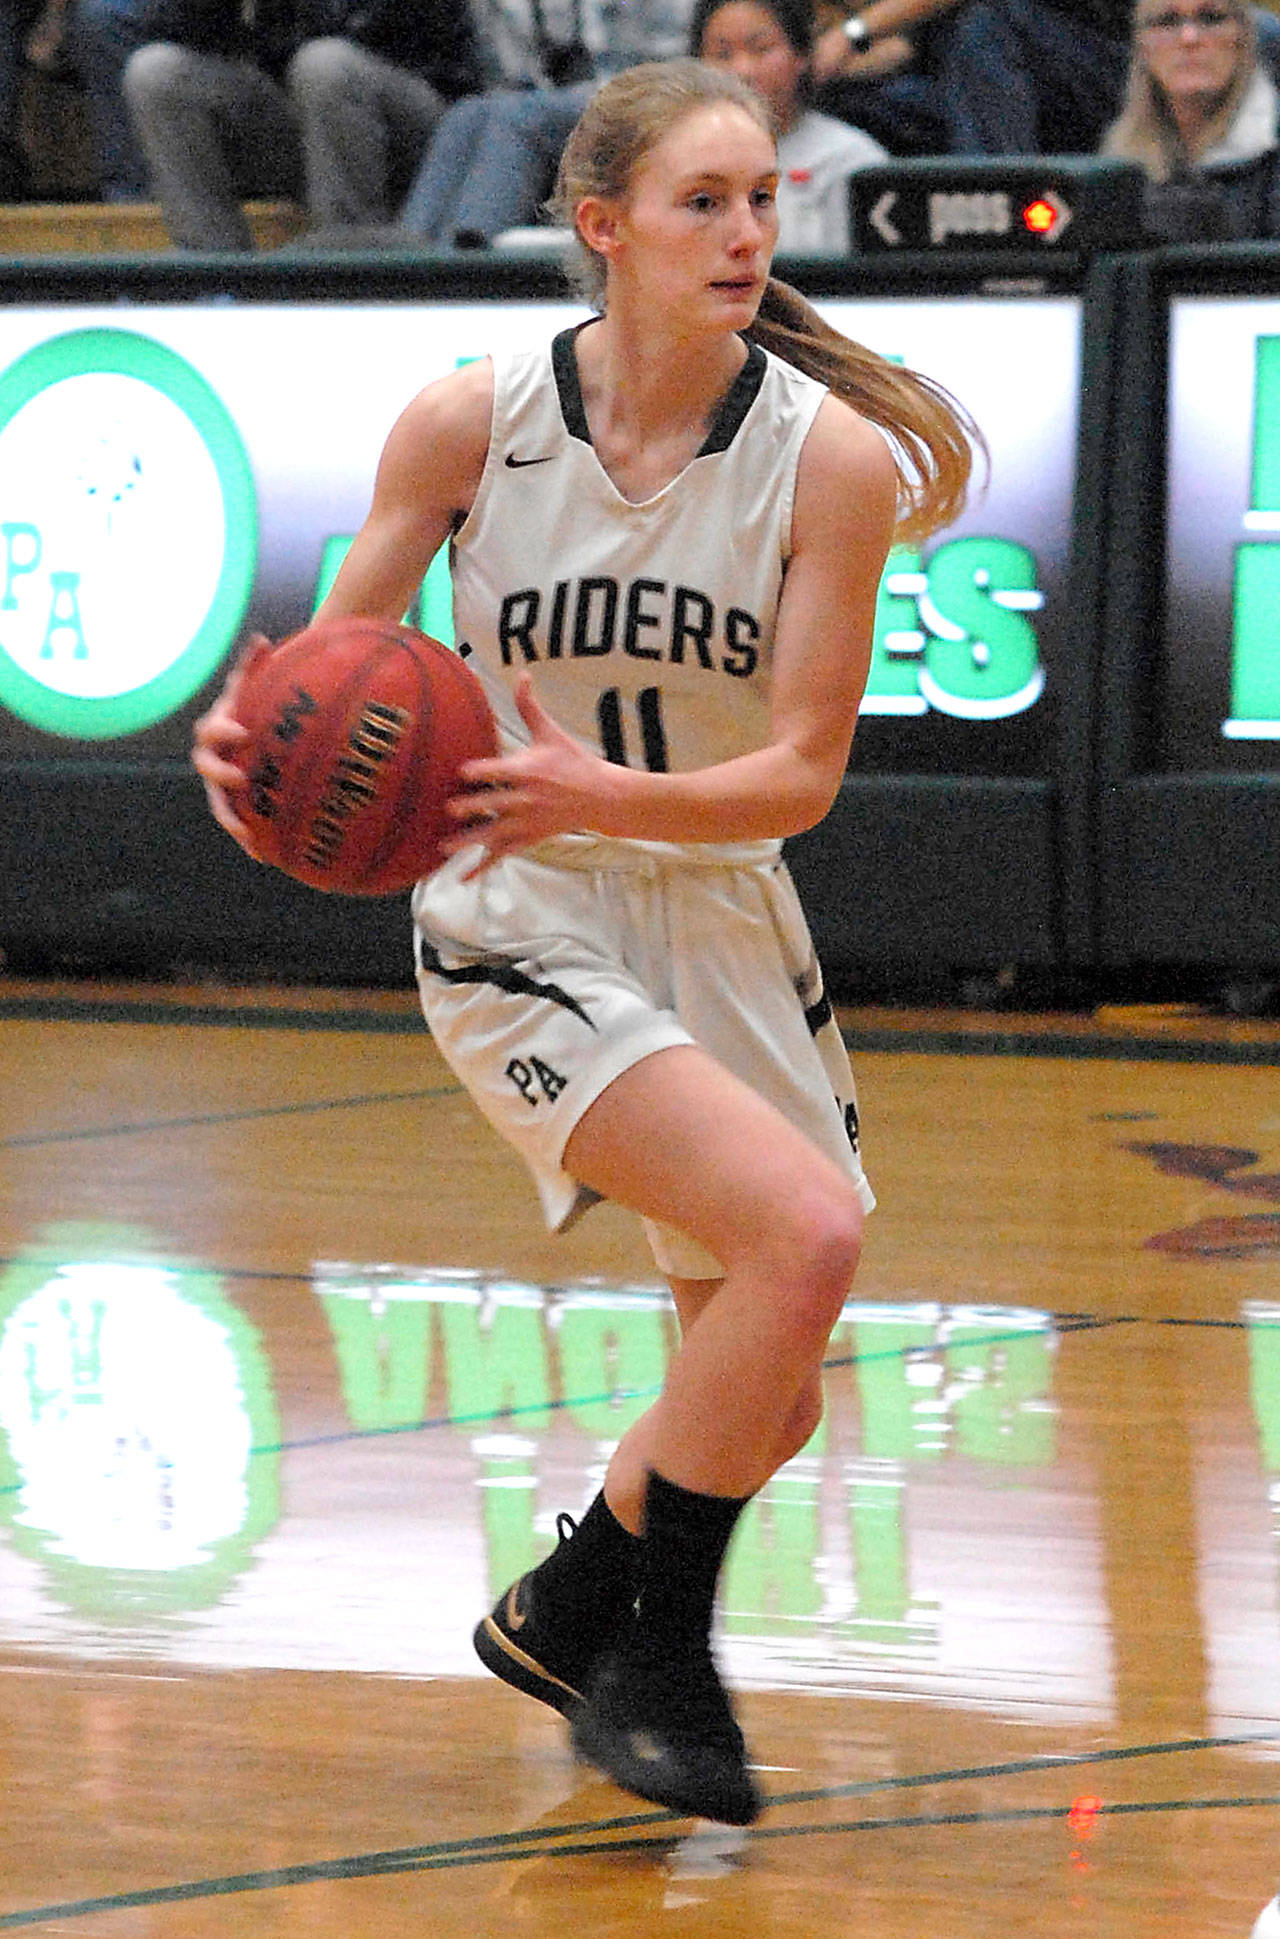 ALL-PENINSULA GIRLS BASKETBALL: Millie Long powers Port Angeles (plus All-Peninsula squad with players from around the North Olympic Peninsula)